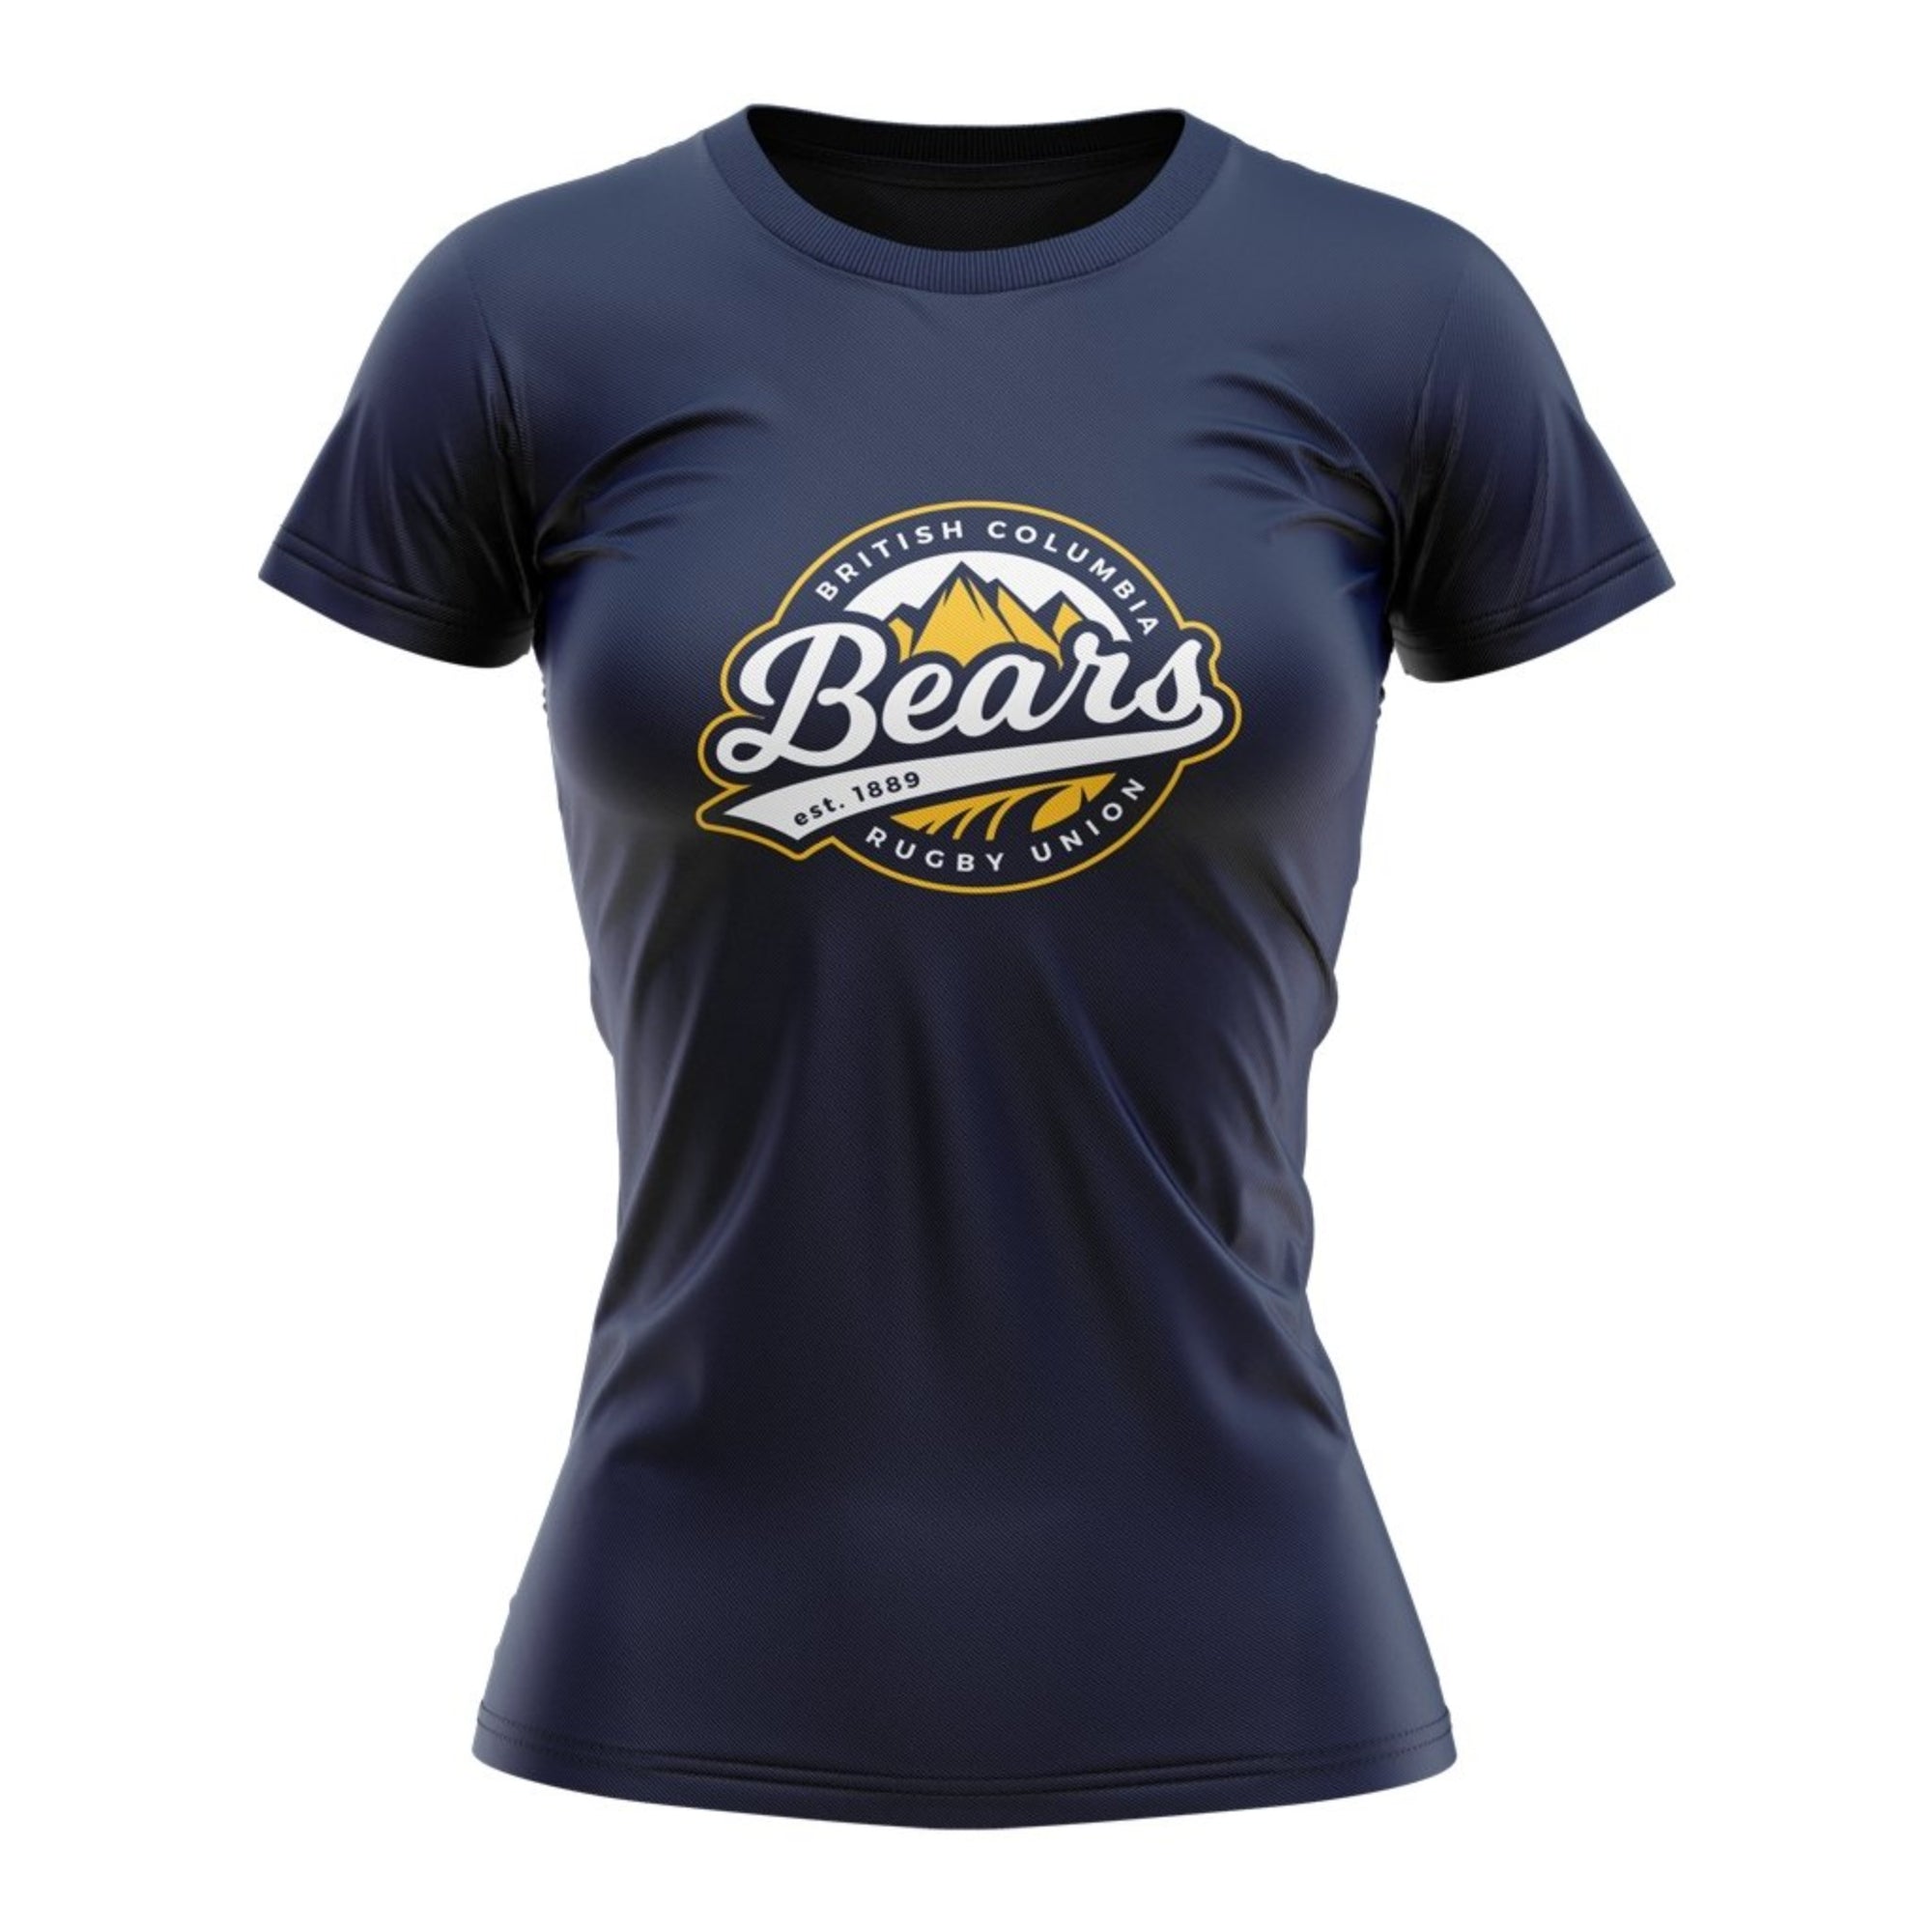 BC Rugby 2021 "Icon" Tee - Women's Navy/Grey/White/Gold - www.therugbyshop.com www.therugbyshop.com WOMENS / NAVY / XS XIX Brands TEES BC Rugby 2021 "Icon" Tee - Women's Navy/Grey/White/Gold